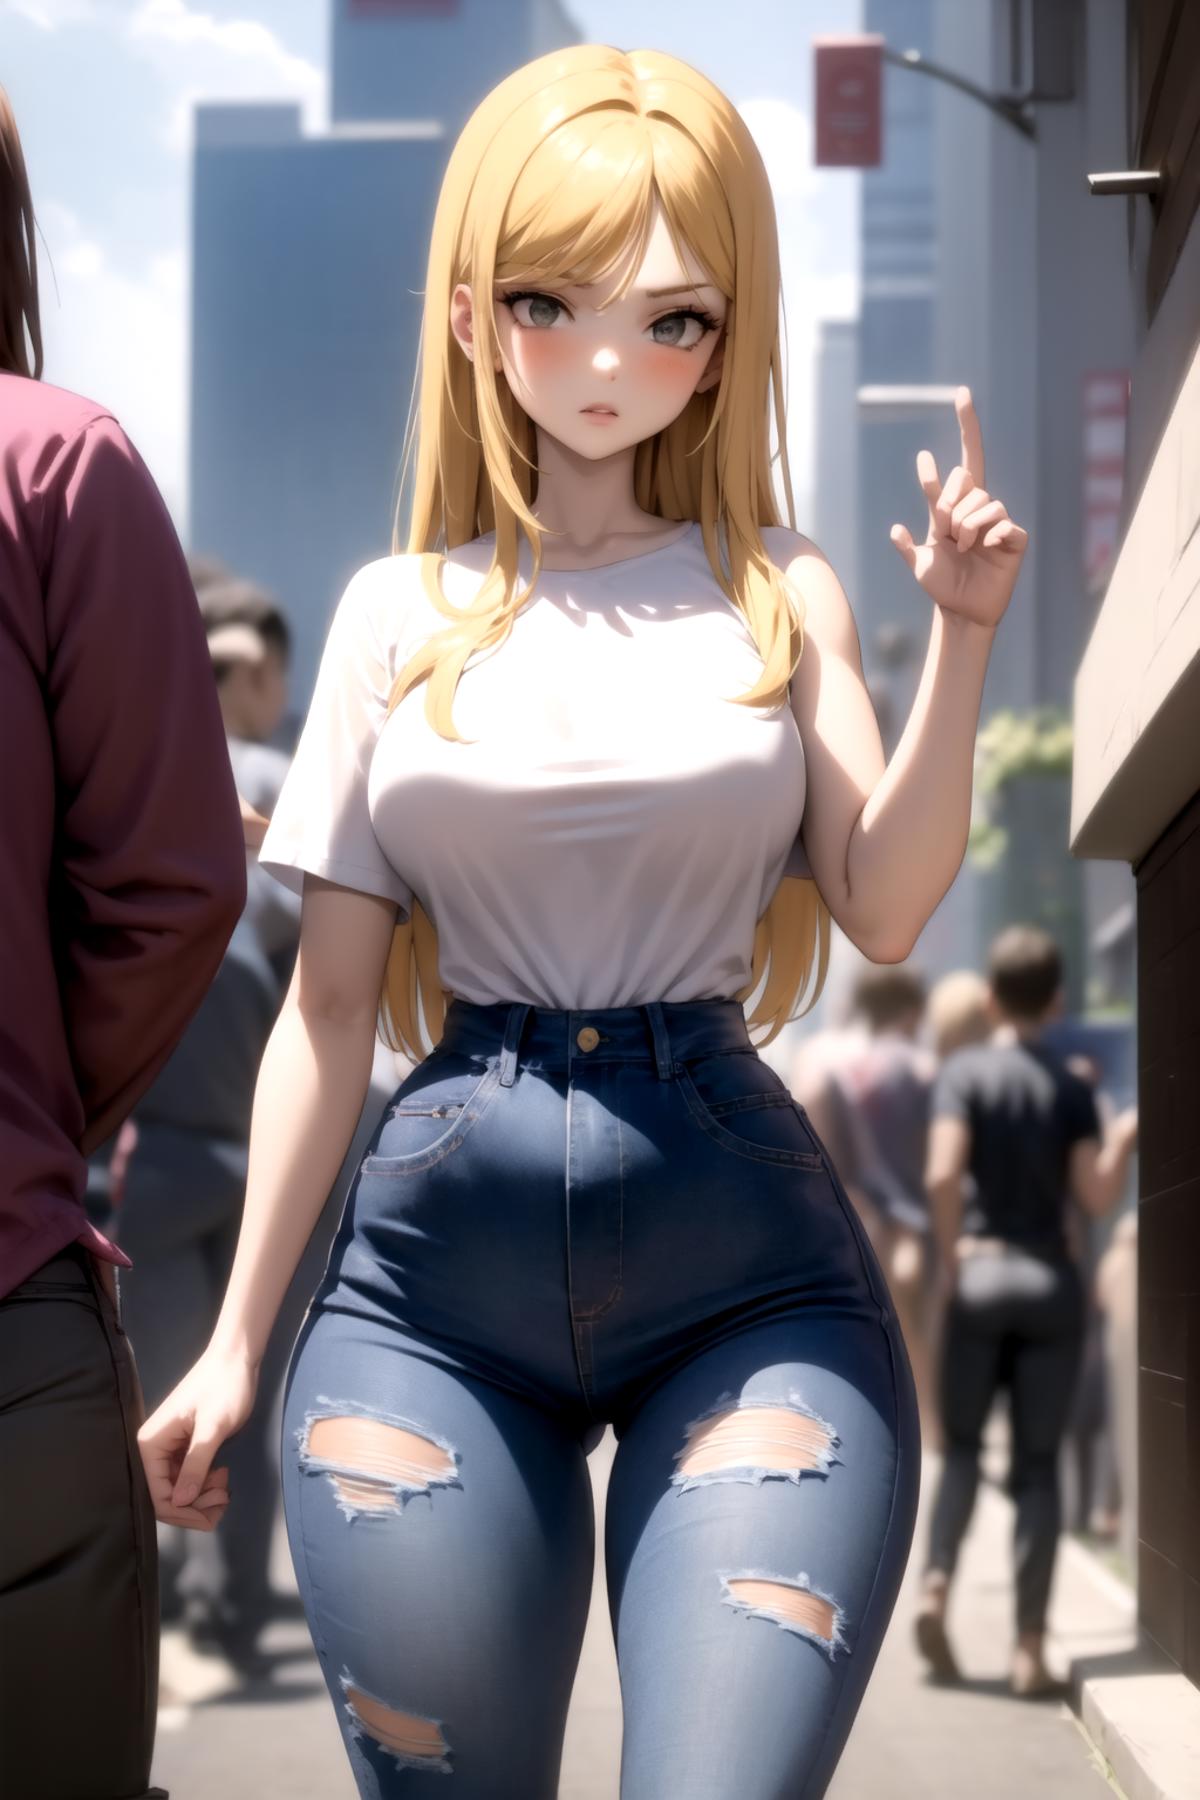 Thicc (slider) image by psoft